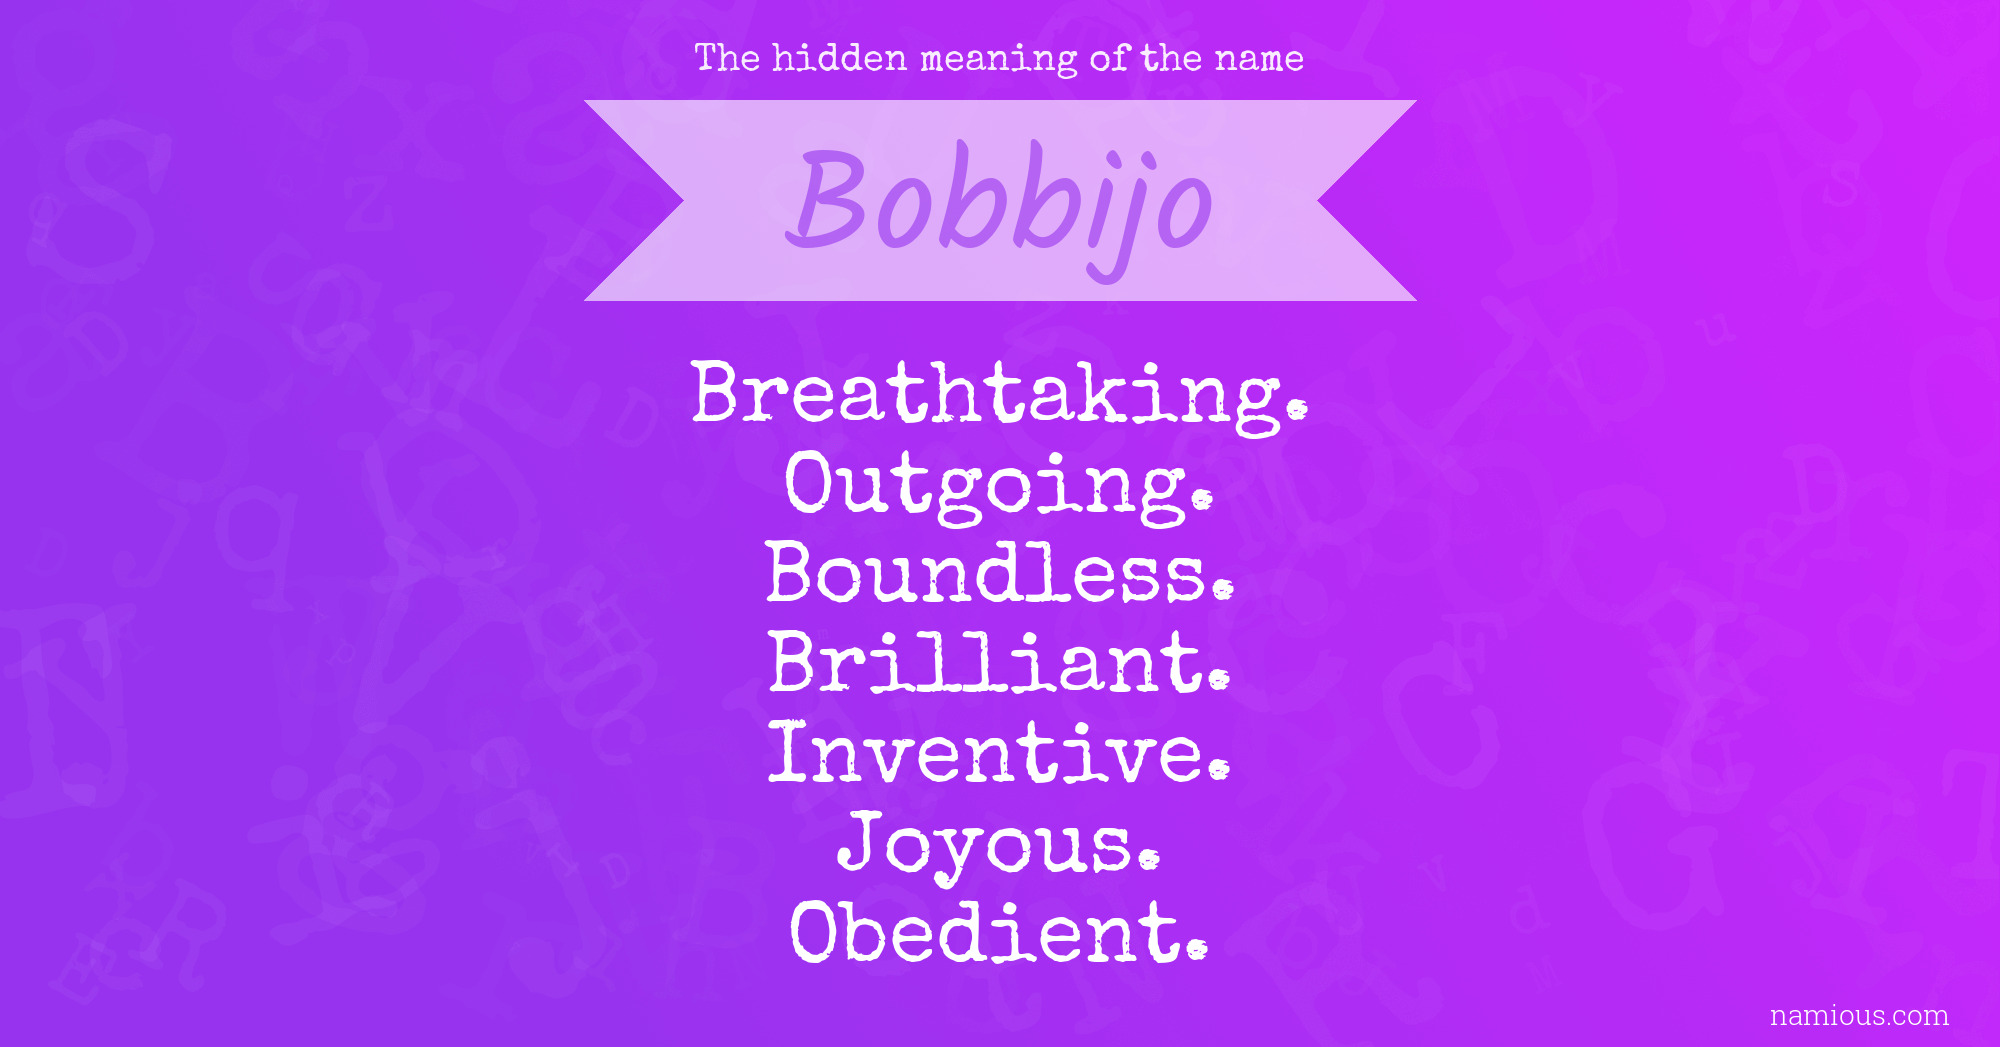 The hidden meaning of the name Bobbijo